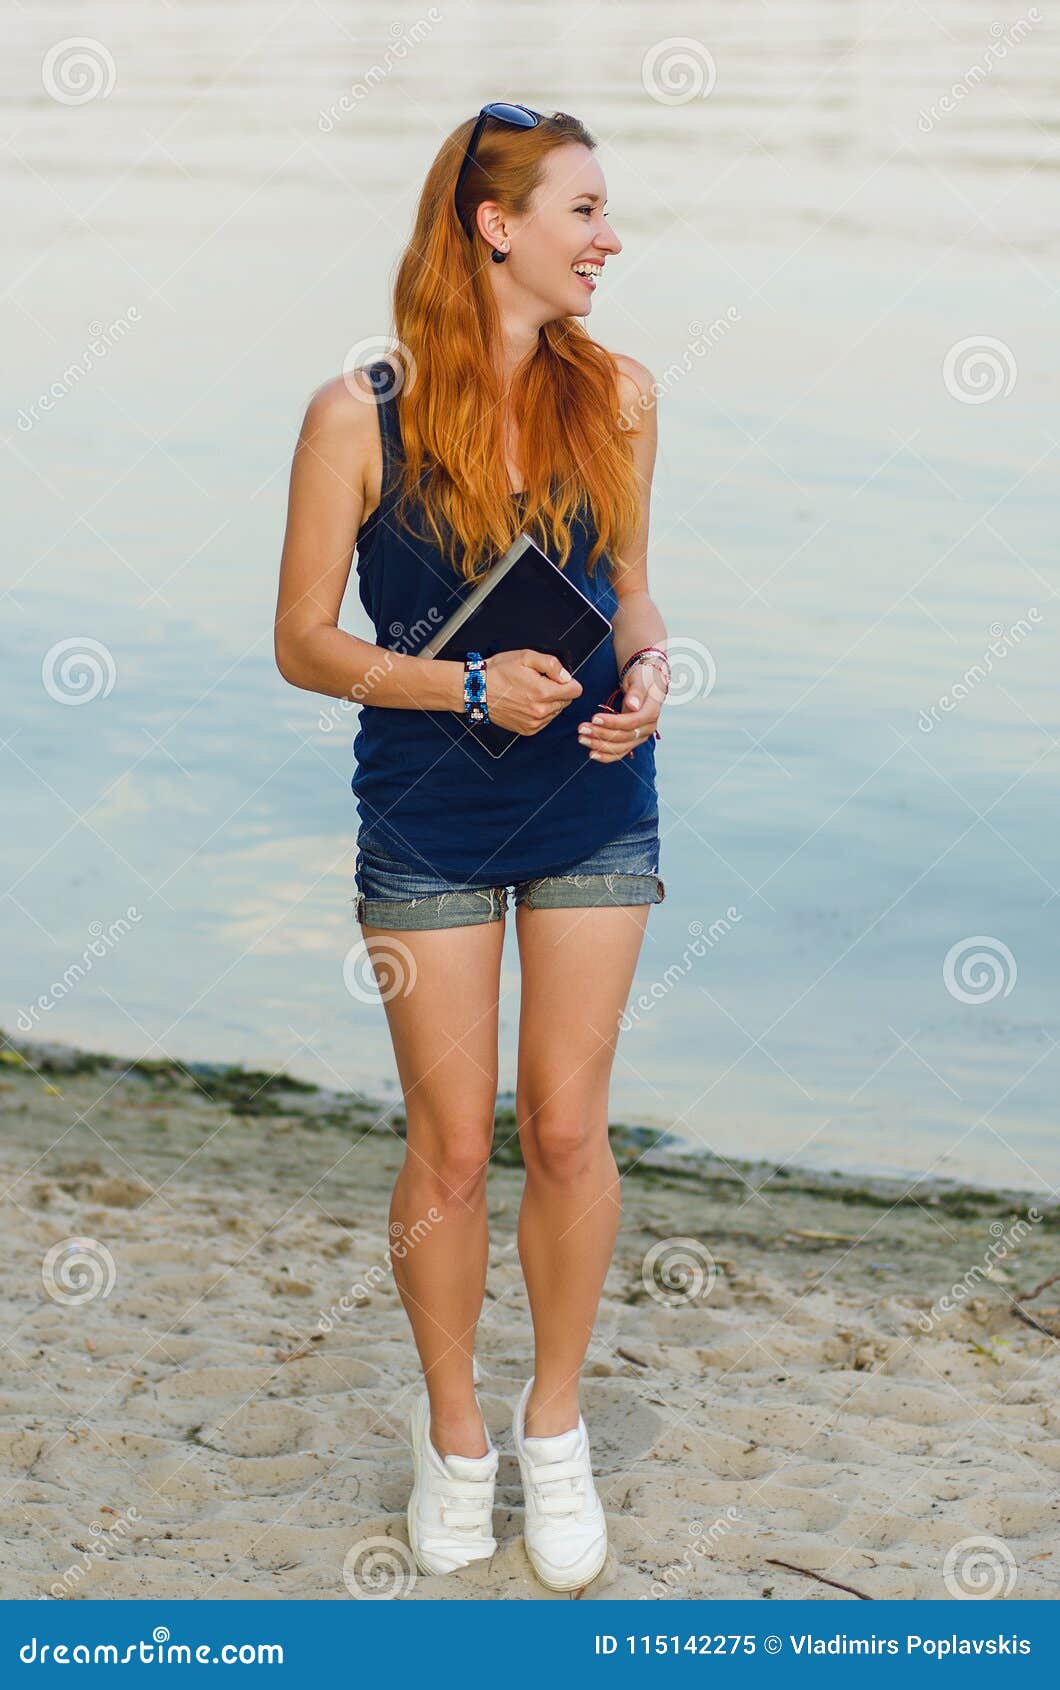 Redhead Woman In Jeans Shorts Stock Image Image Of